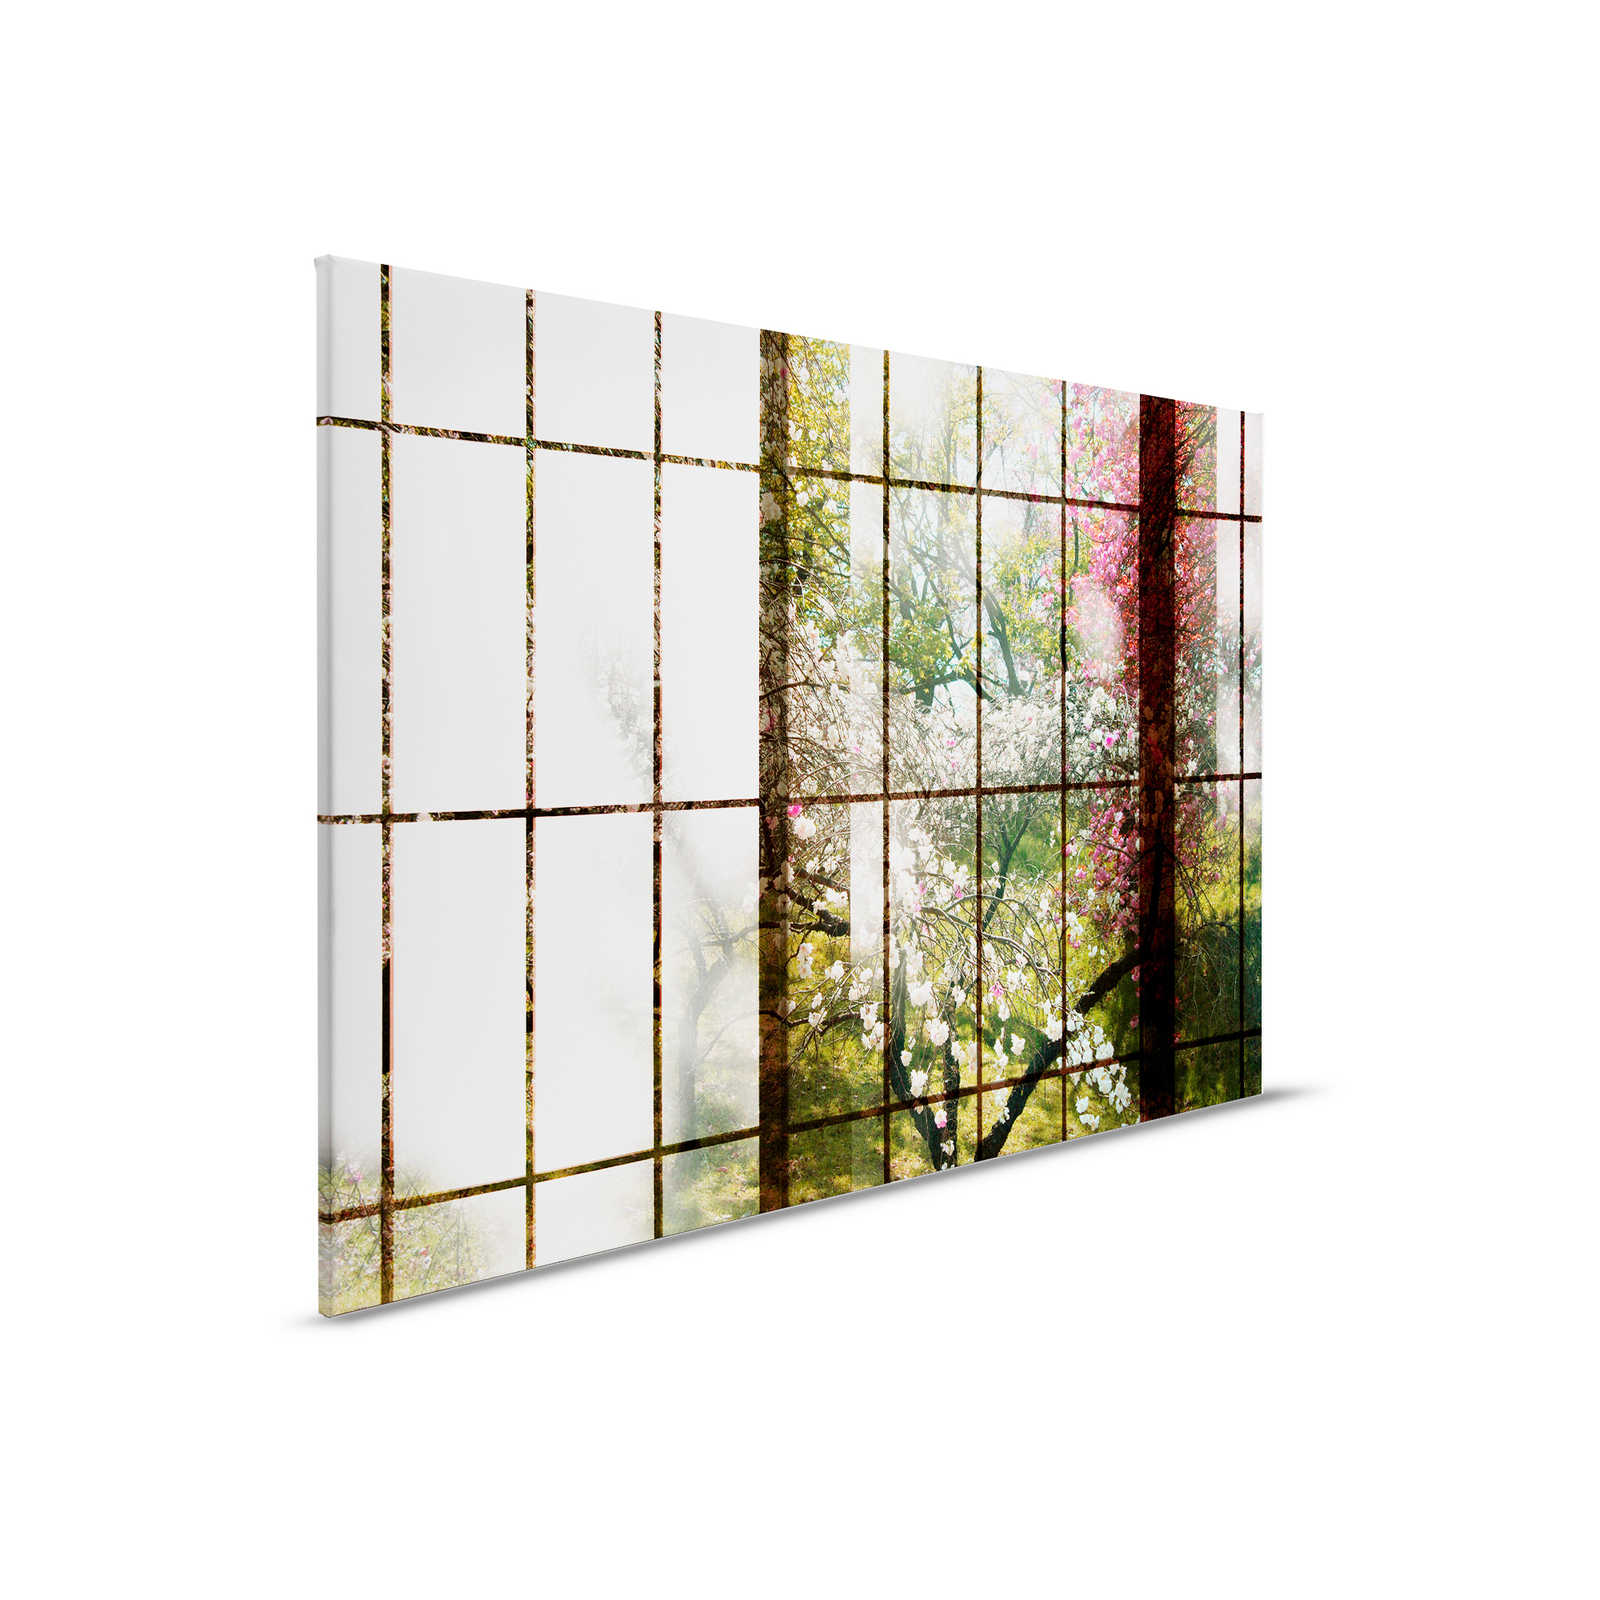         Orchard 1 - Canvas painting, Window with garden view - 0.90 m x 0.60 m
    